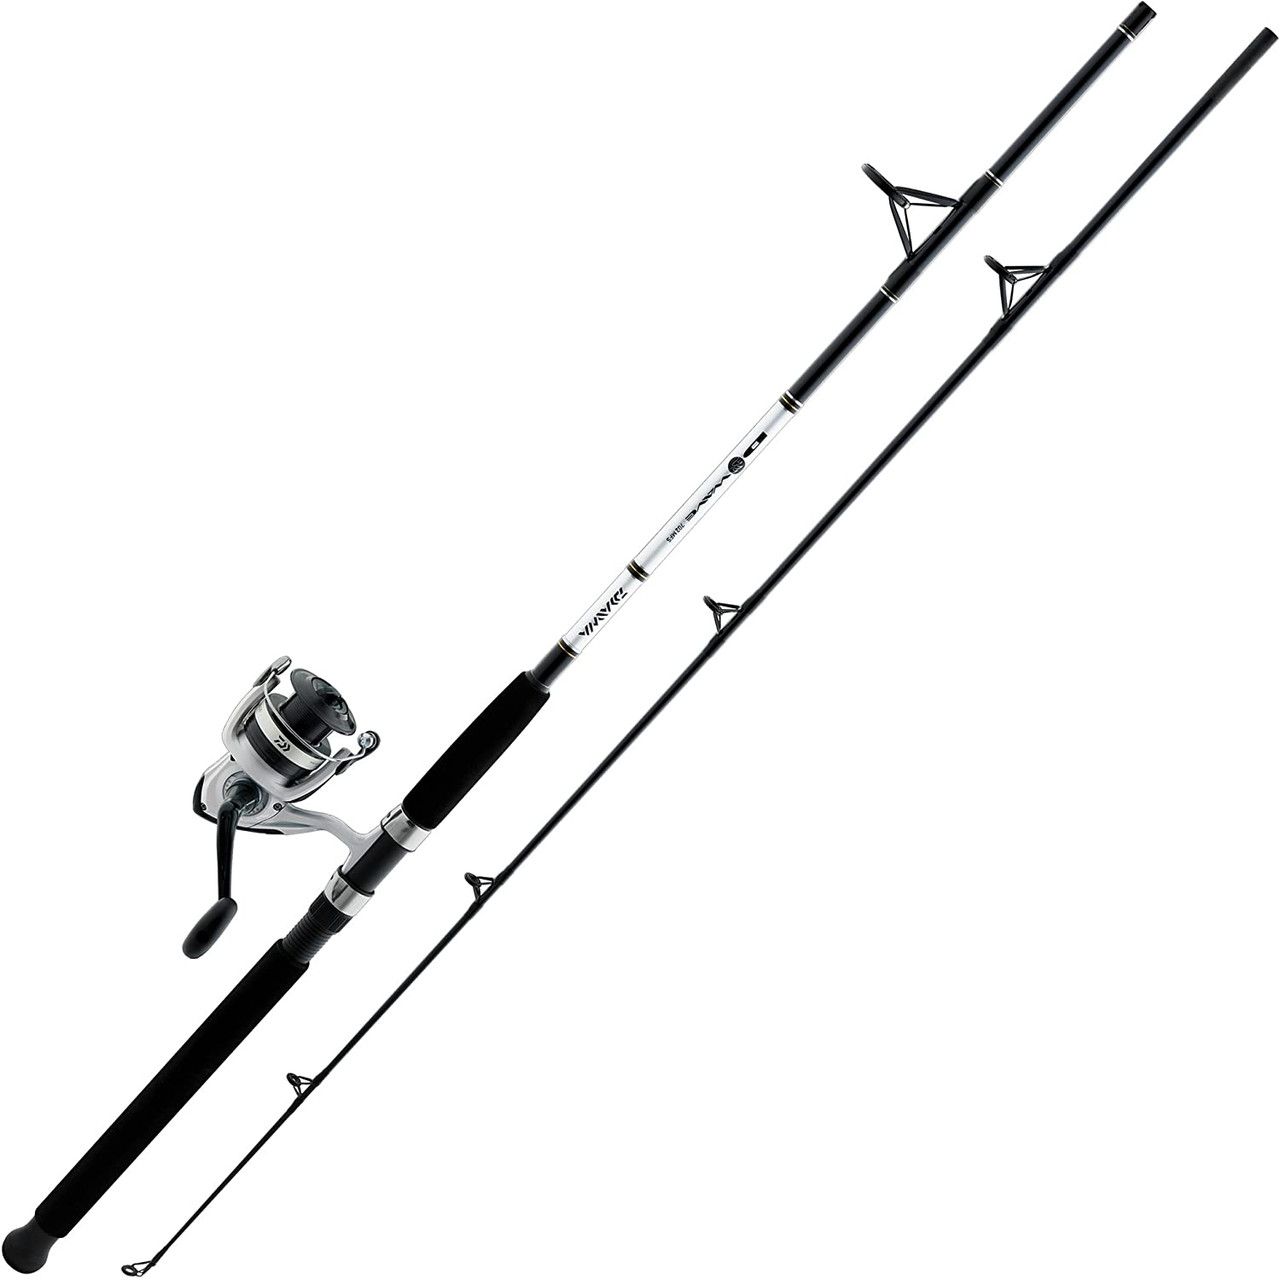 Buy DAIWAD Wave Surf Beach Fishing Rod - 12ft or 13ft Online at